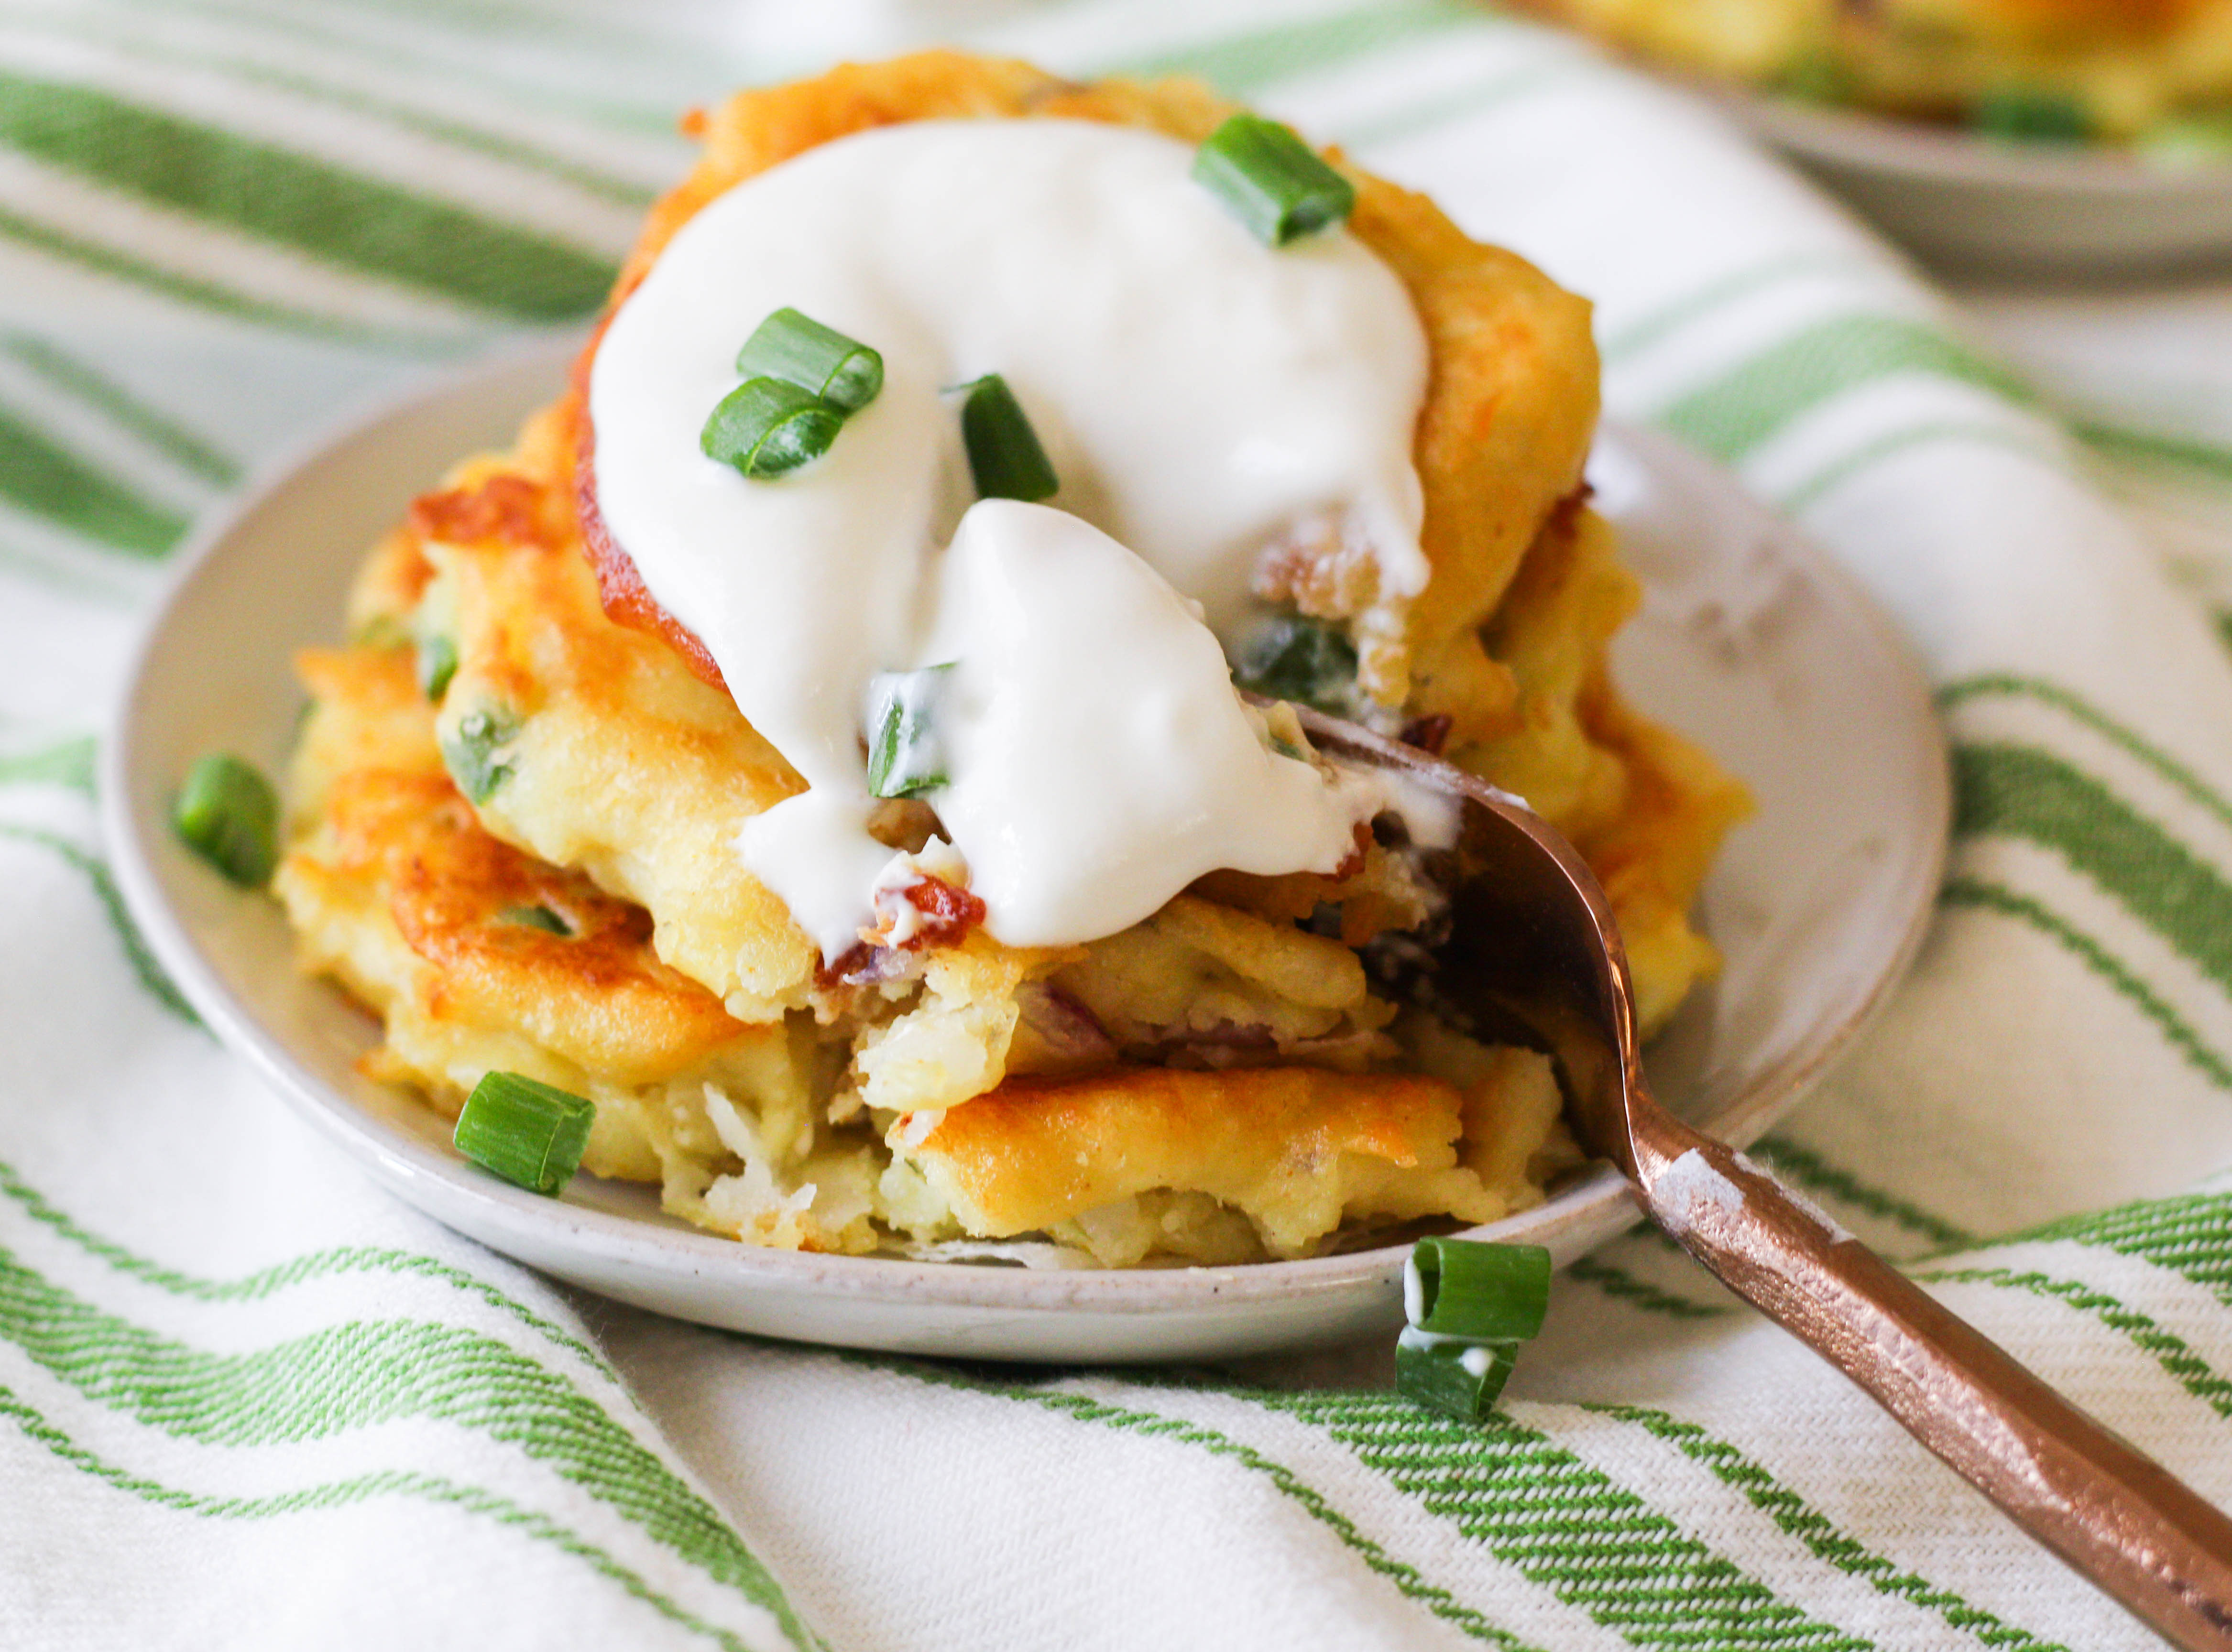 Crispy and golden, these spicy curry potato pancakes are the perfect way to use up leftover mashed potatoes. 